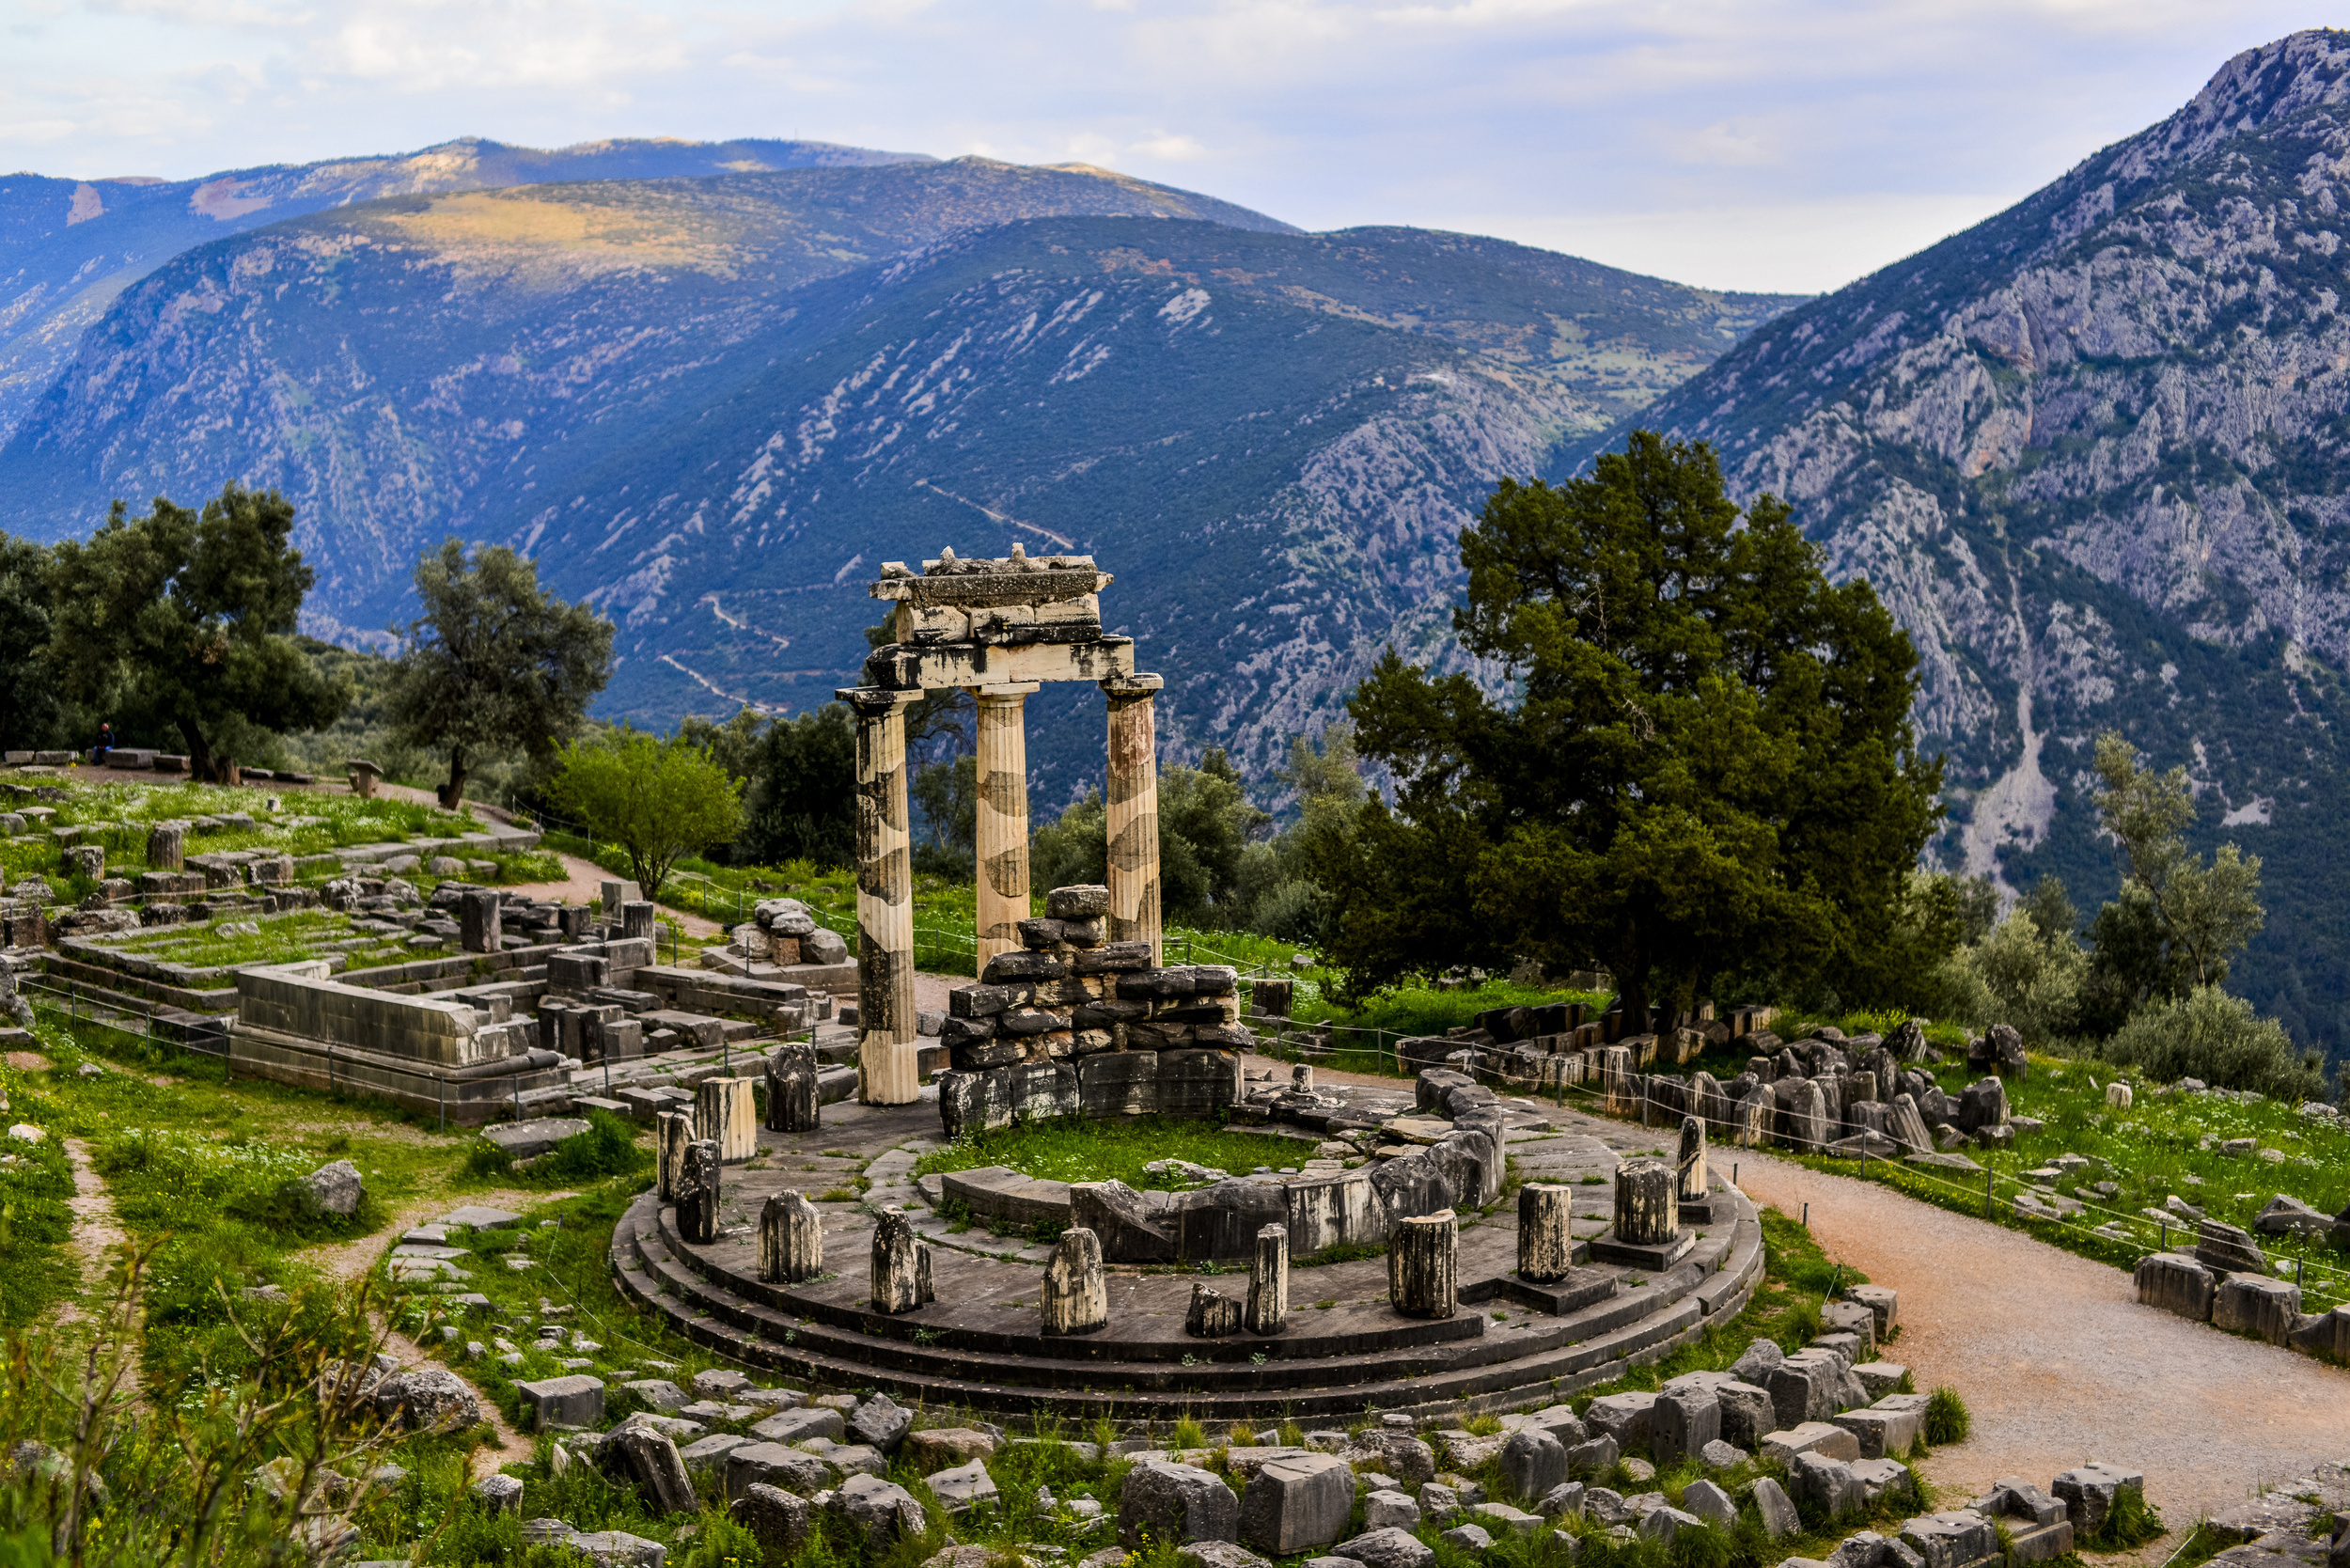 <p>This UNESCO World Heritage site is just a couple hours from the Greek capital. It’s a must-visit if you’re a history or archeology buff. In ancient times, the town was known as the home of the Oracle, Delphi, and a naval stronghold. These days, it houses some of the most impressive ruins in the country.</p><p>You may also like: <a href='https://www.yardbarker.com/lifestyle/articles/celebrate_valentines_day_with_these_22_chocolate_dessert_recipes_021224/s1__37106057'>Celebrate Valentine’s Day with these 22 chocolate dessert recipes</a></p>